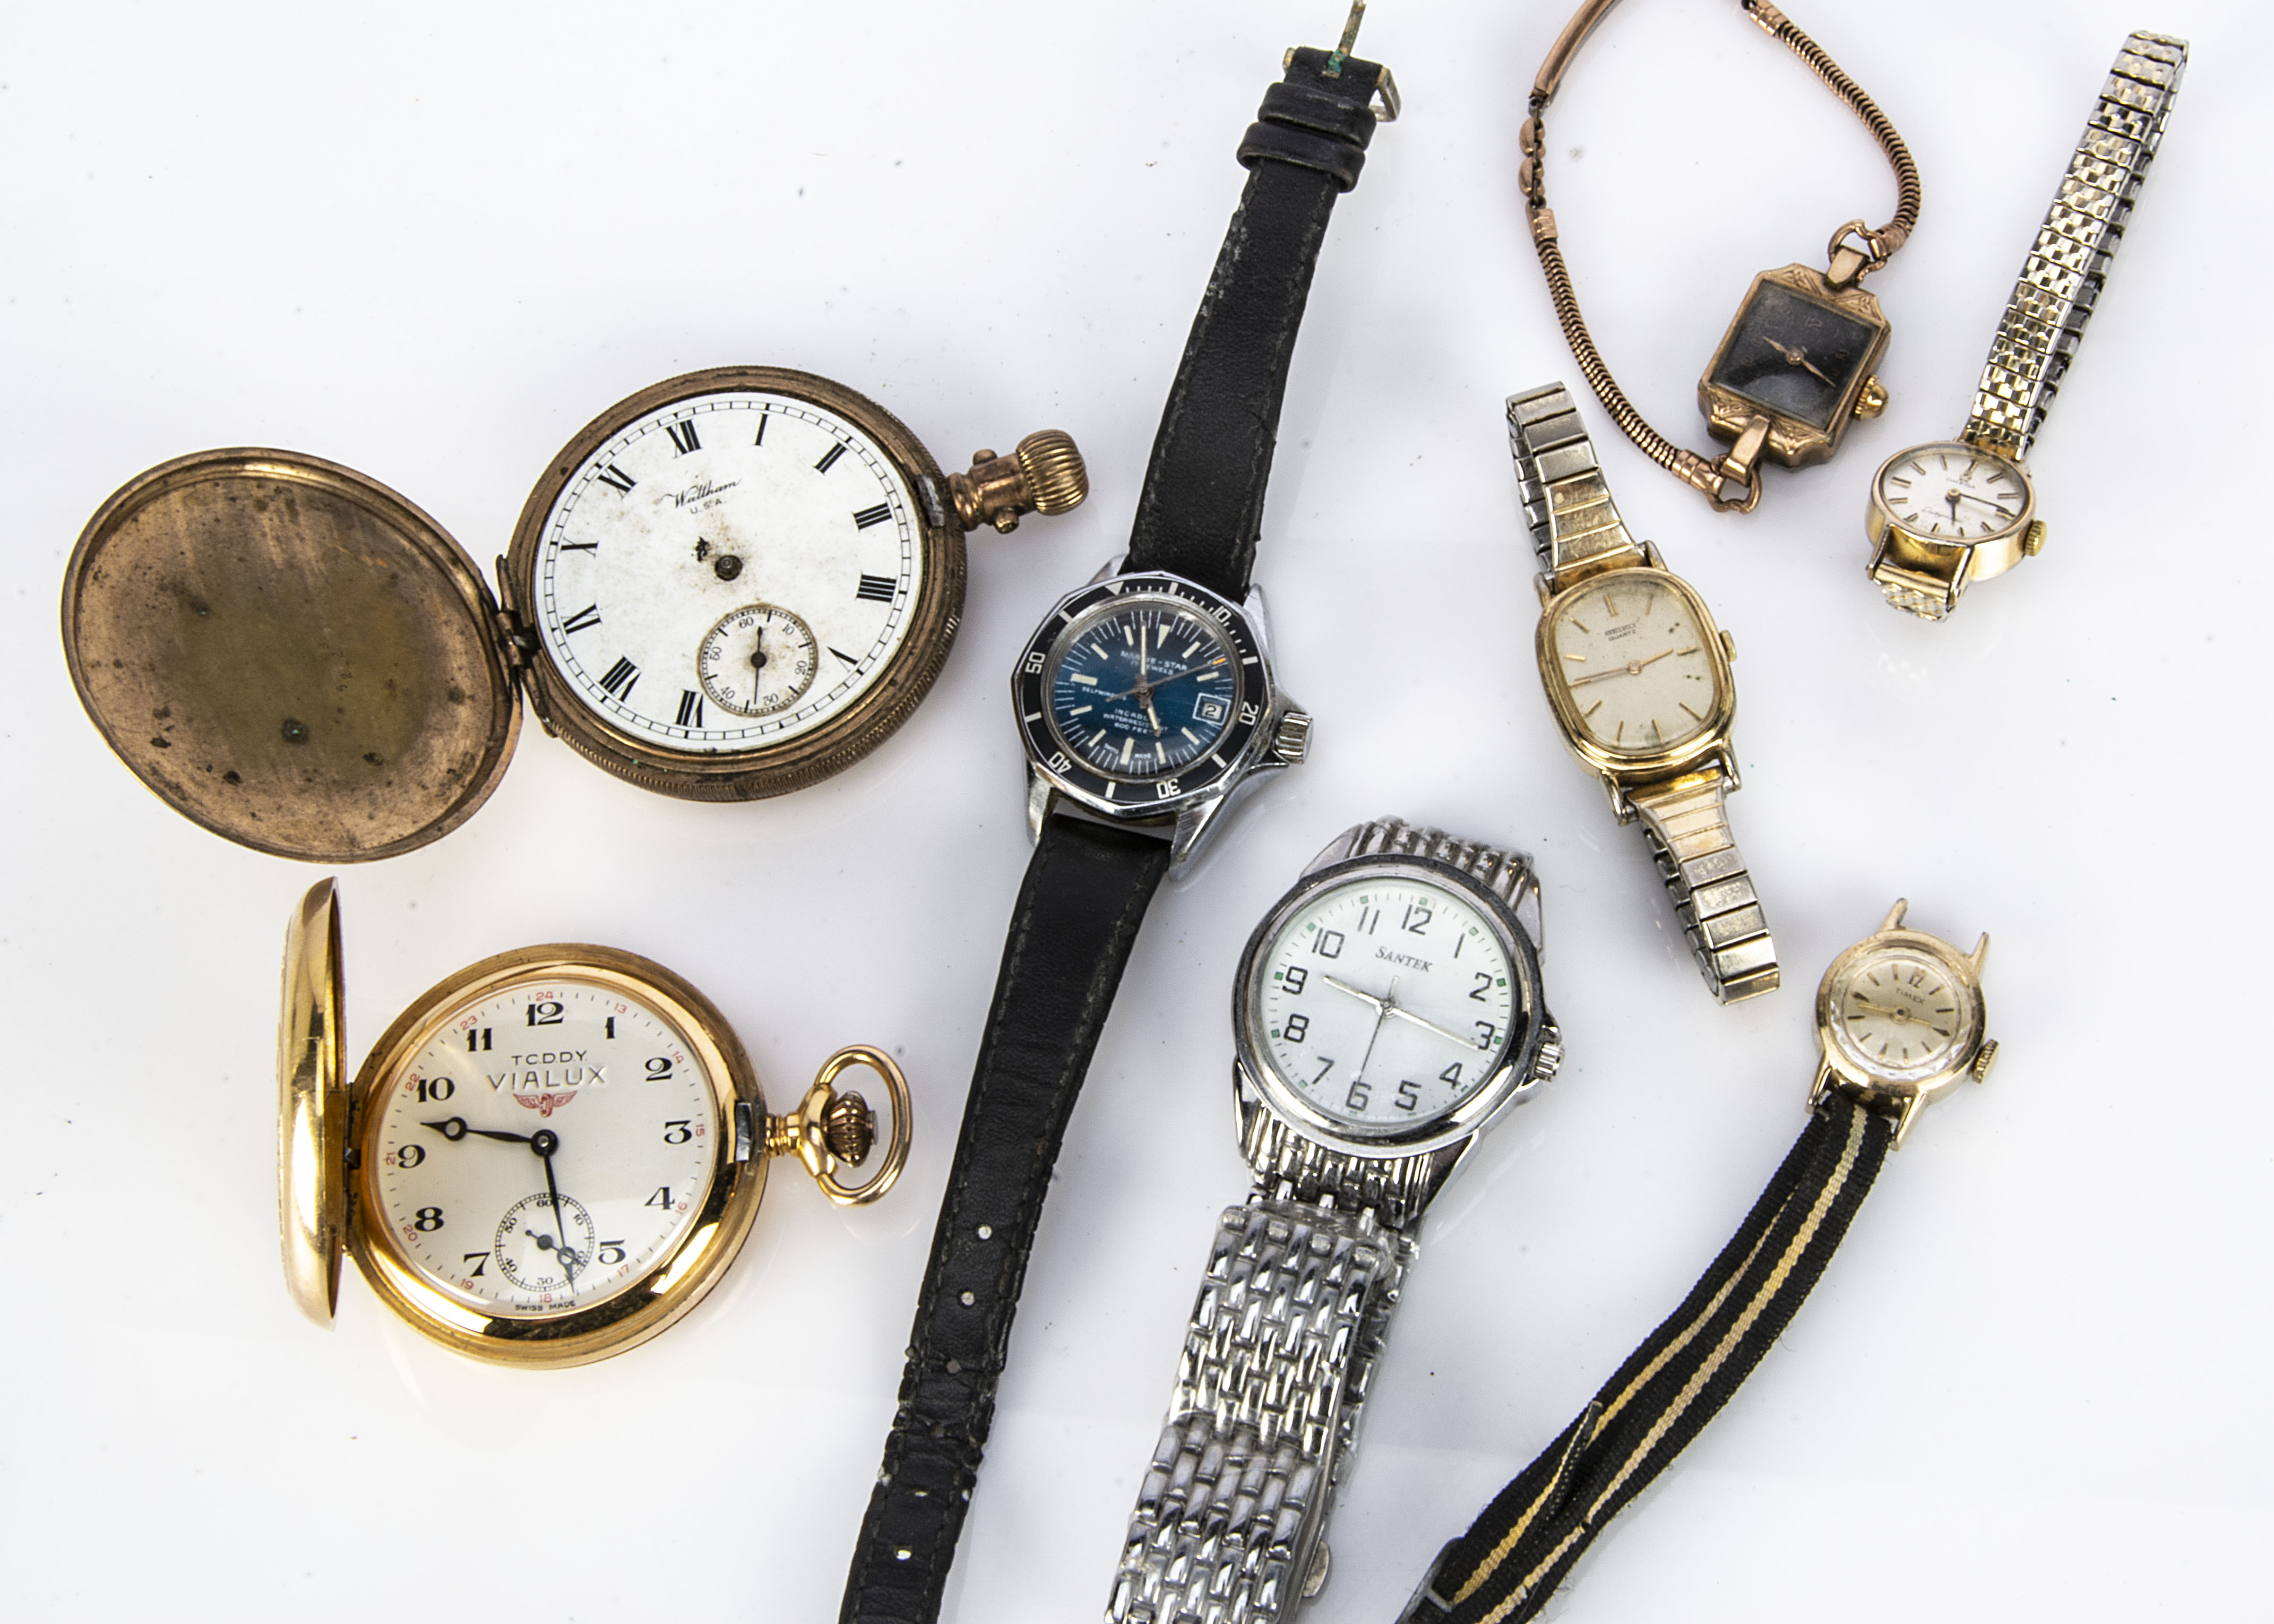 A small collection of watches, including a lady's or boys Marine Star diver's wristwatch, a Vialux